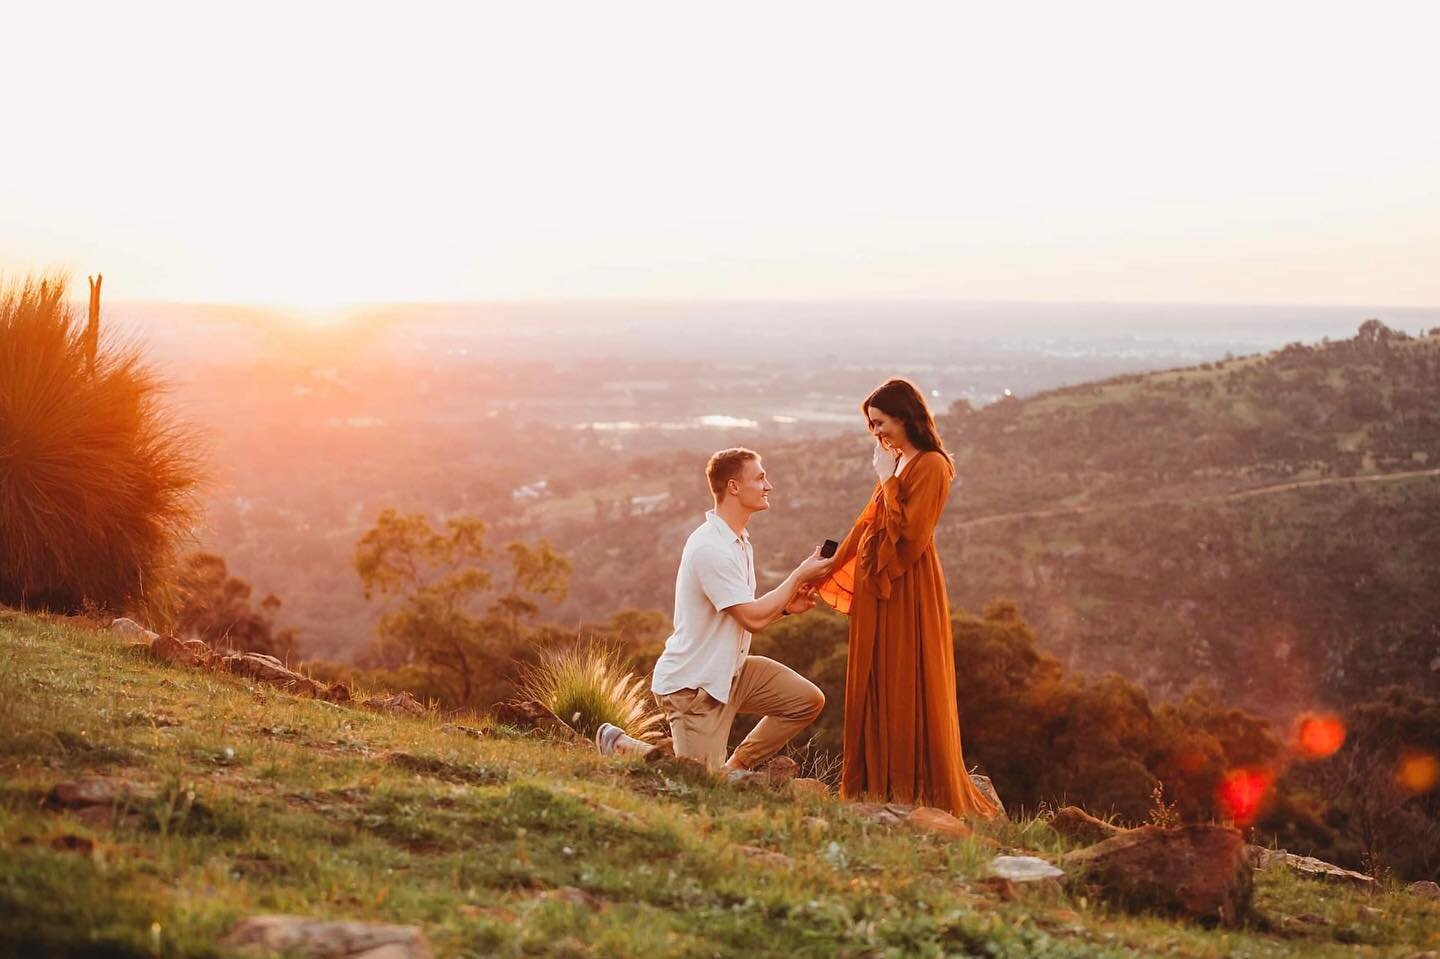 🧡 on a hill
radiating and wearing a beautiful dress
so in love carrying his baby boy

&amp;

this 💍

much to this photographers surprise 🥰 @sarah_heath12
.
.
.

#perthfamilyphotographer #perthfamilyphotography #perthfamilyportraits #perthphotograp